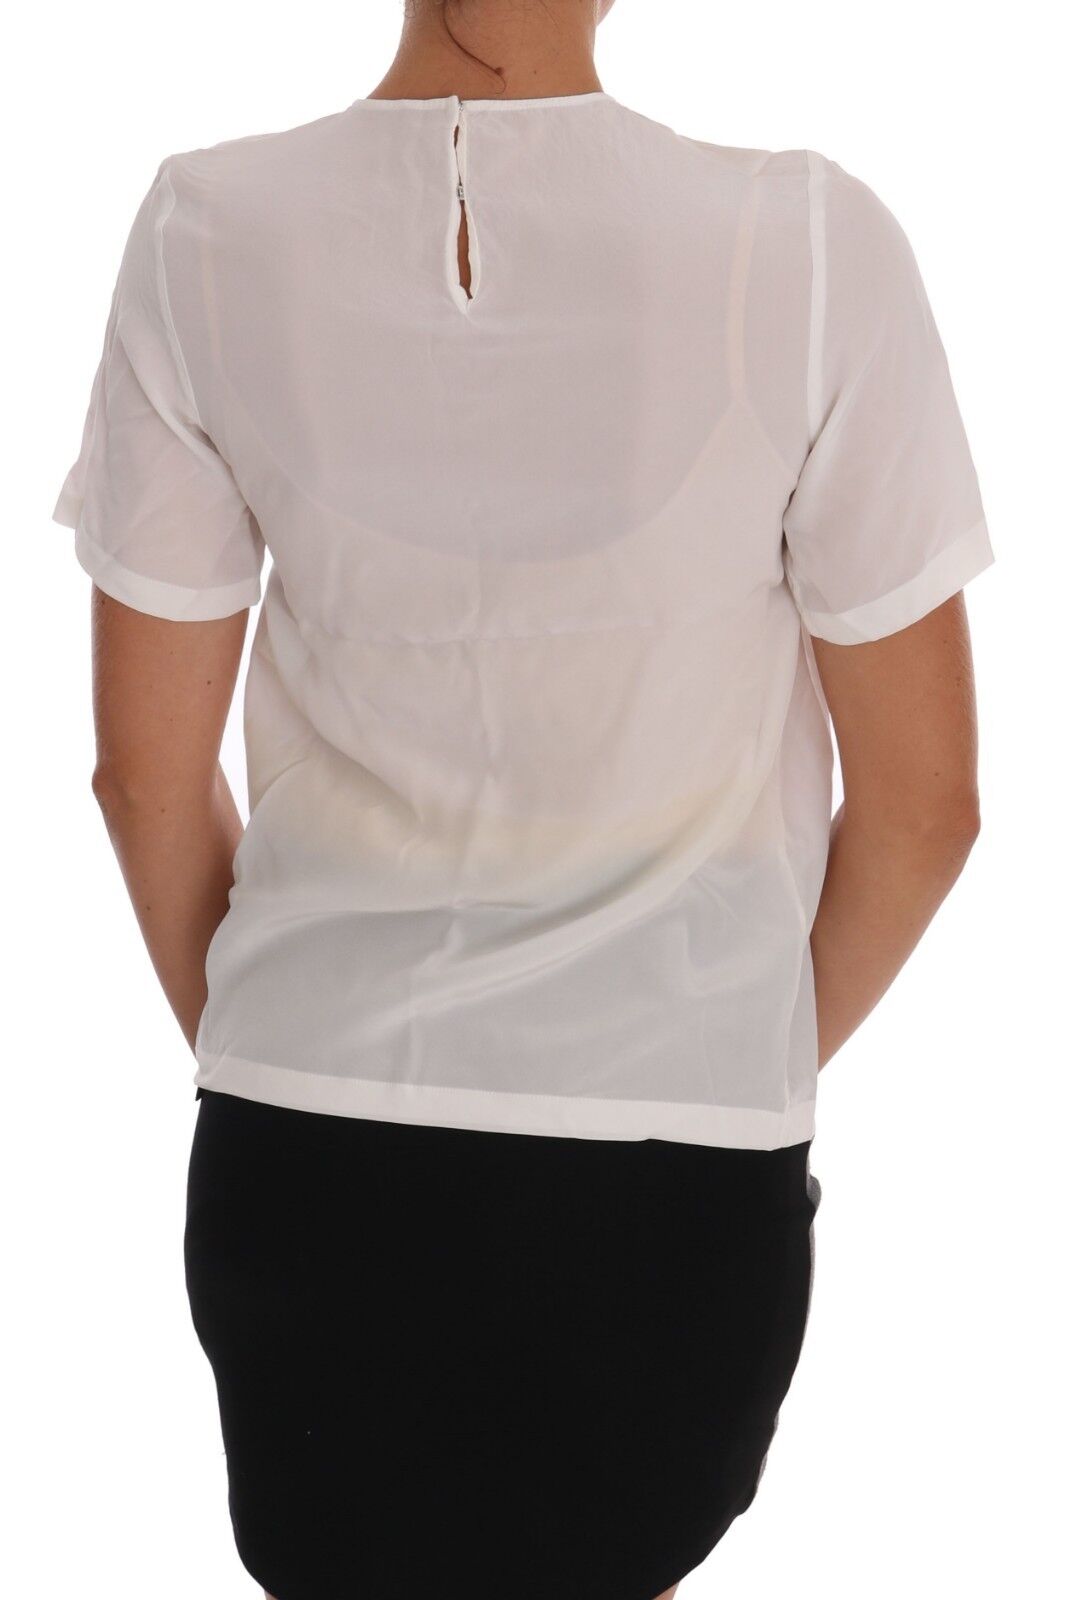 Pre-owned Dolce & Gabbana Blouse T-shirt White Silk Italia Is Love It36 / Us2 /xs Rrp $880